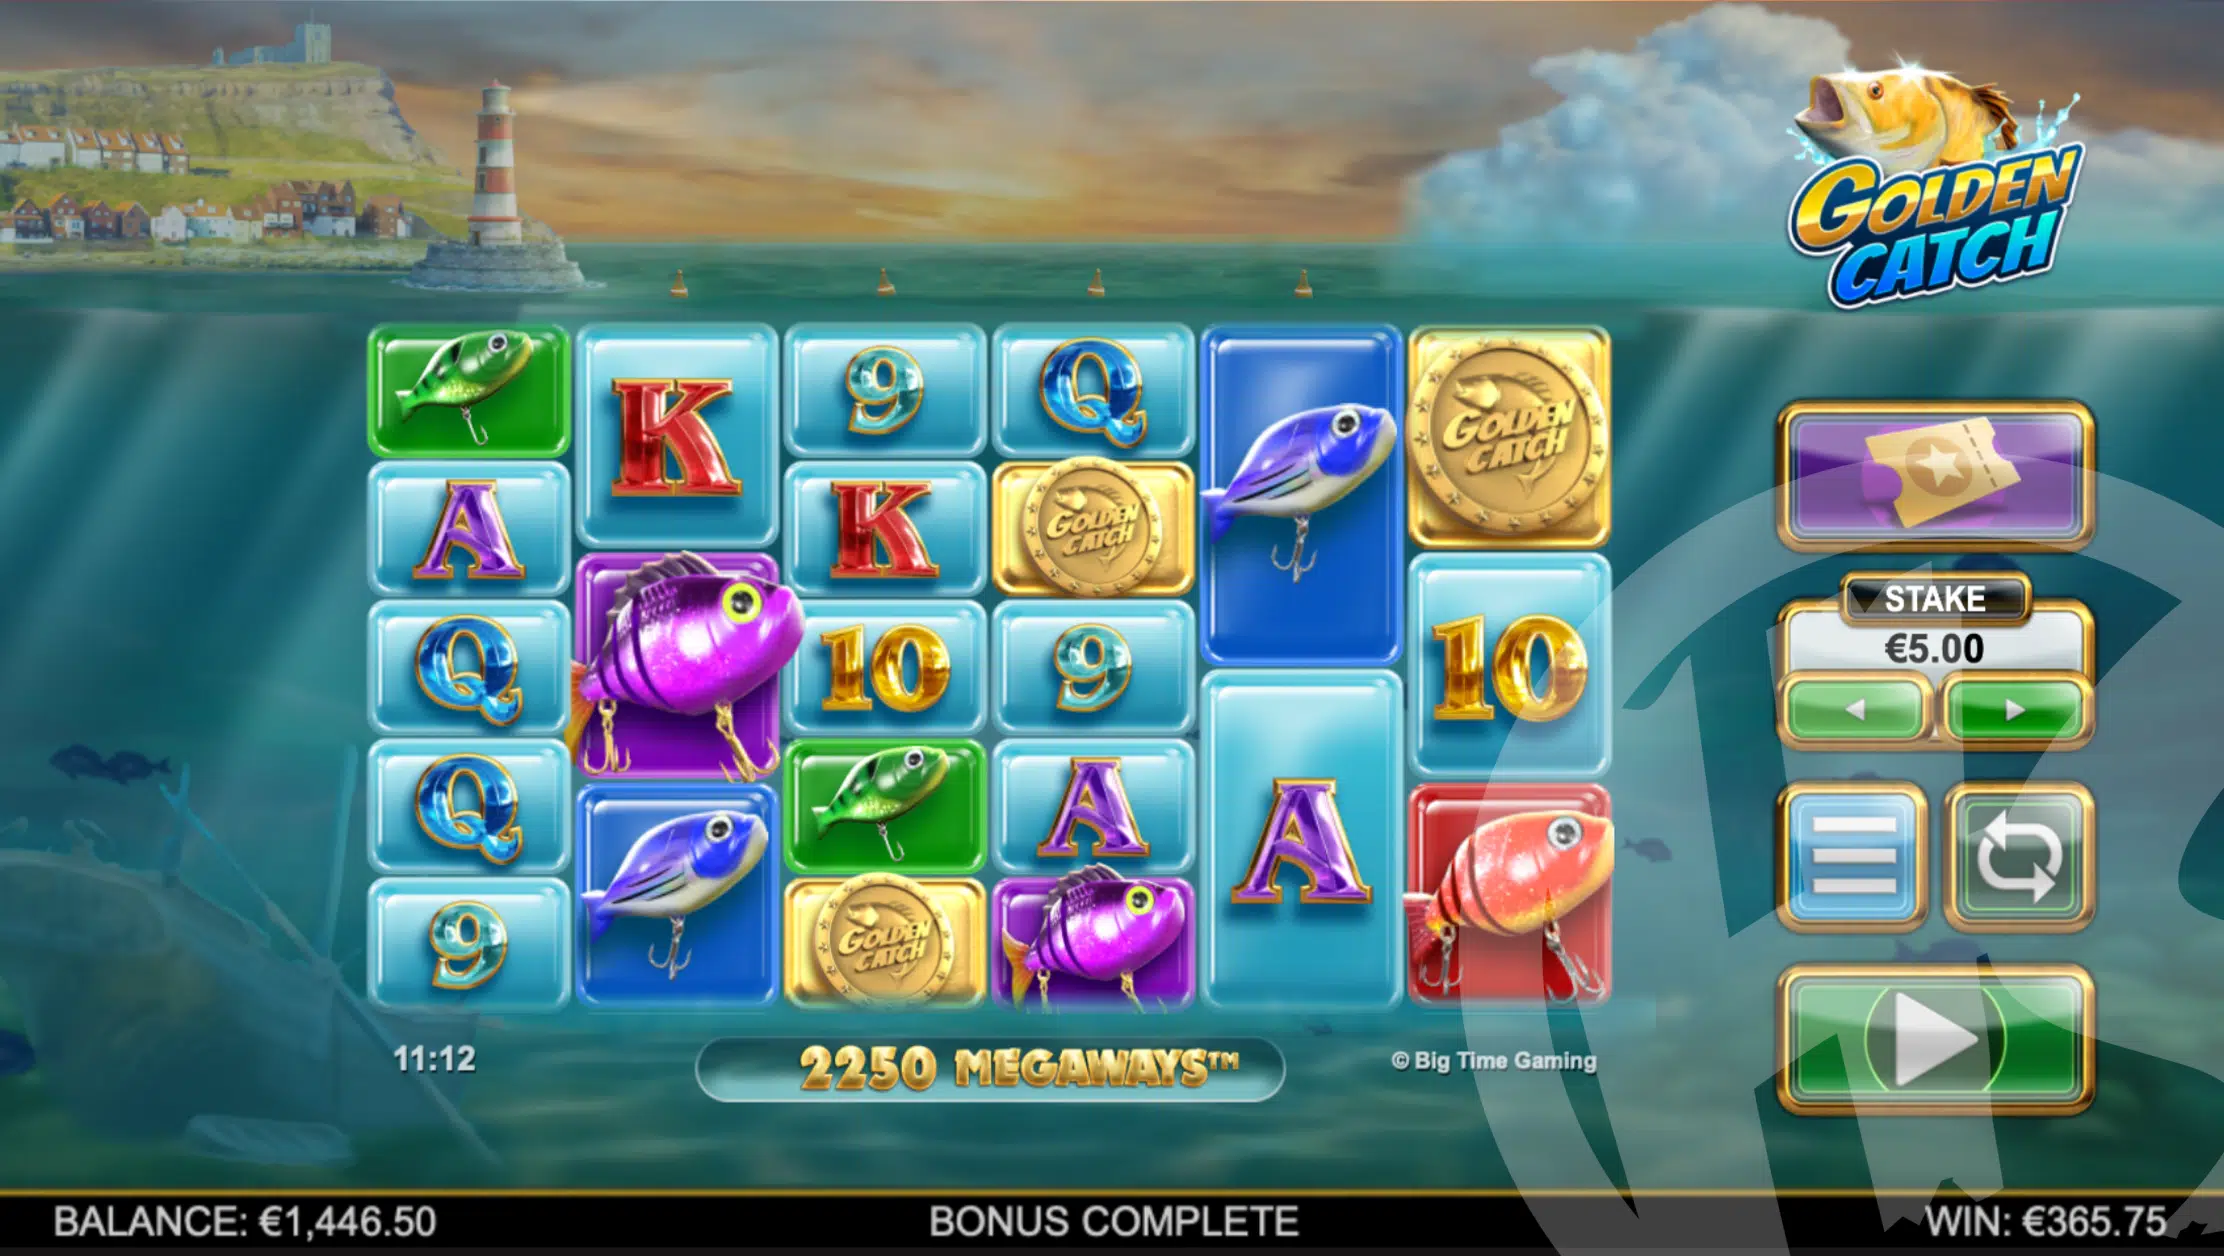 3 Scatters Trigger 10 Free Spins